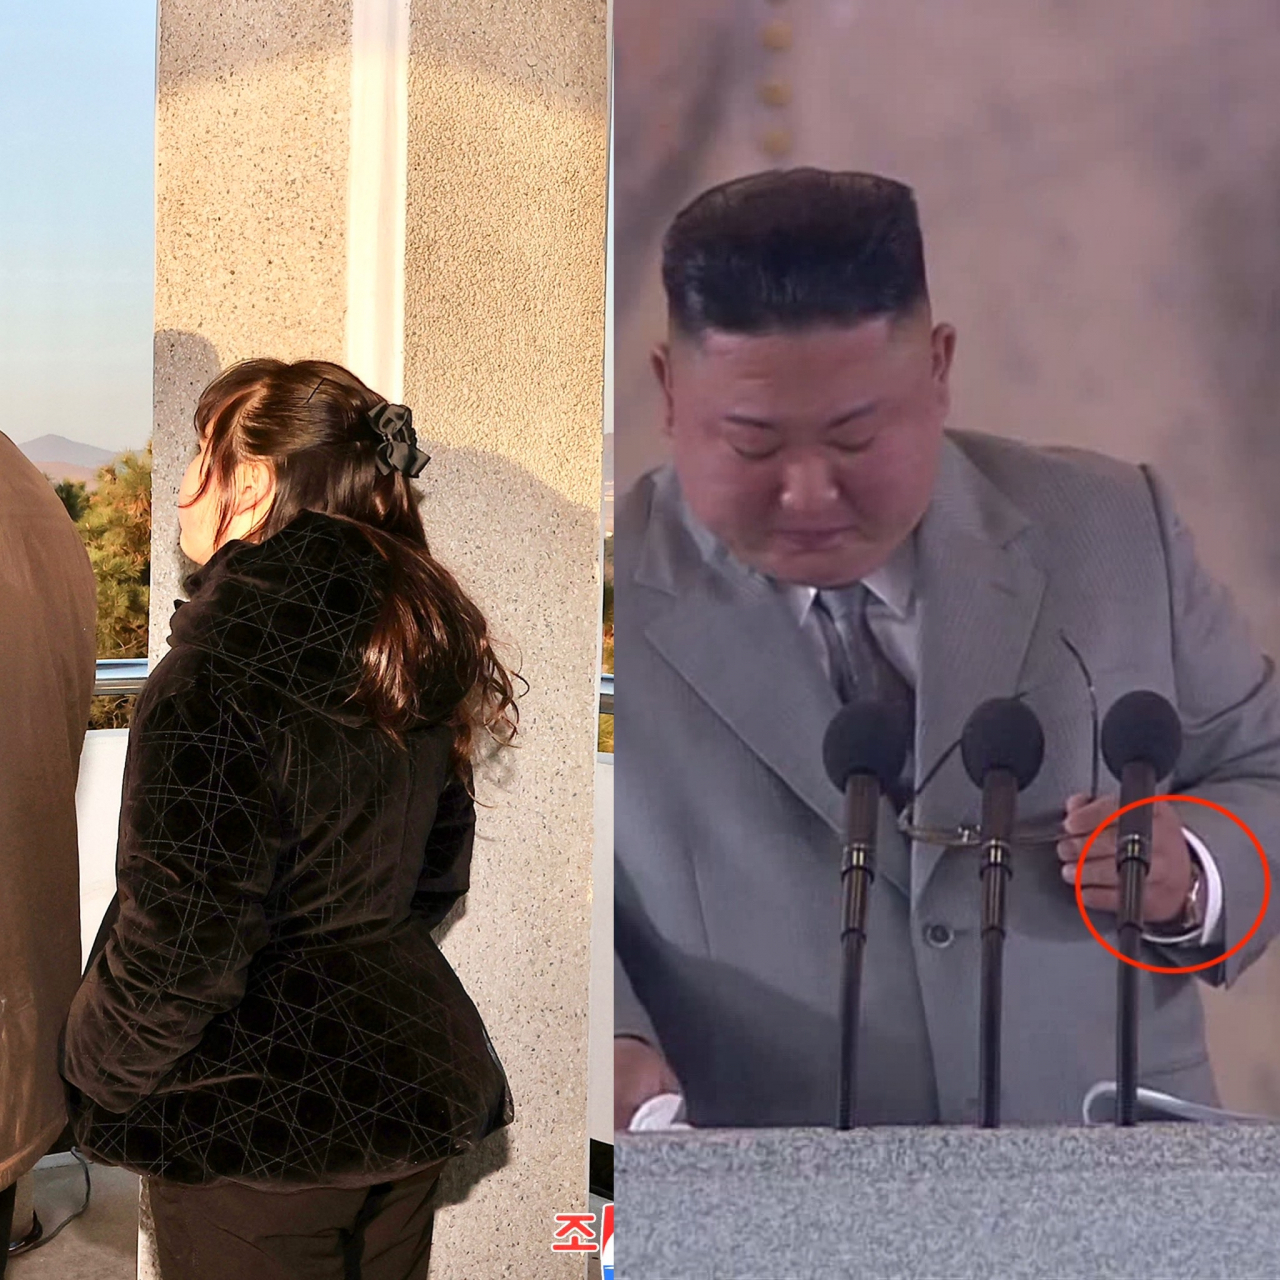 Kim Ju-ae (left), North Korean leader Kim Jong-un's daughter, is seen wearing a $1,900 black coat from Dior during the Hwasong-17 ICBM test launch in March. Kim Jong-un is seen wearing a $13,400 watch from Swiss luxury watch manufacturer IWC Schaffhausen during the military parade celebrating the 75th anniversary of its ruling Worker's Party in 2020. (Korean Central News Agency, Korean Central Television)